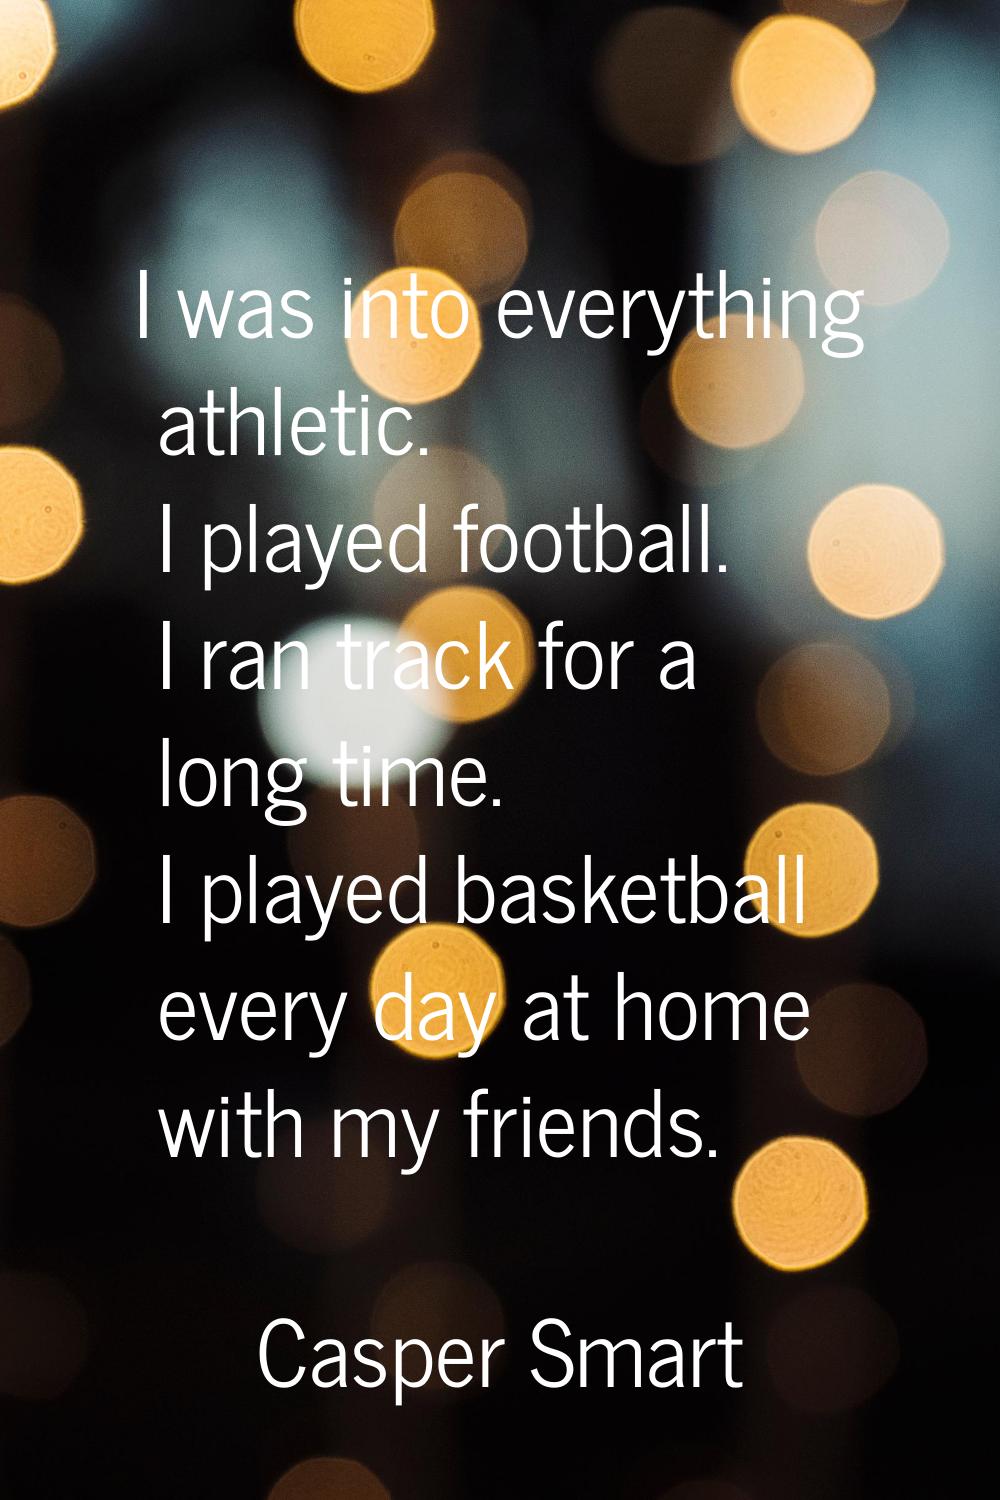 I was into everything athletic. I played football. I ran track for a long time. I played basketball